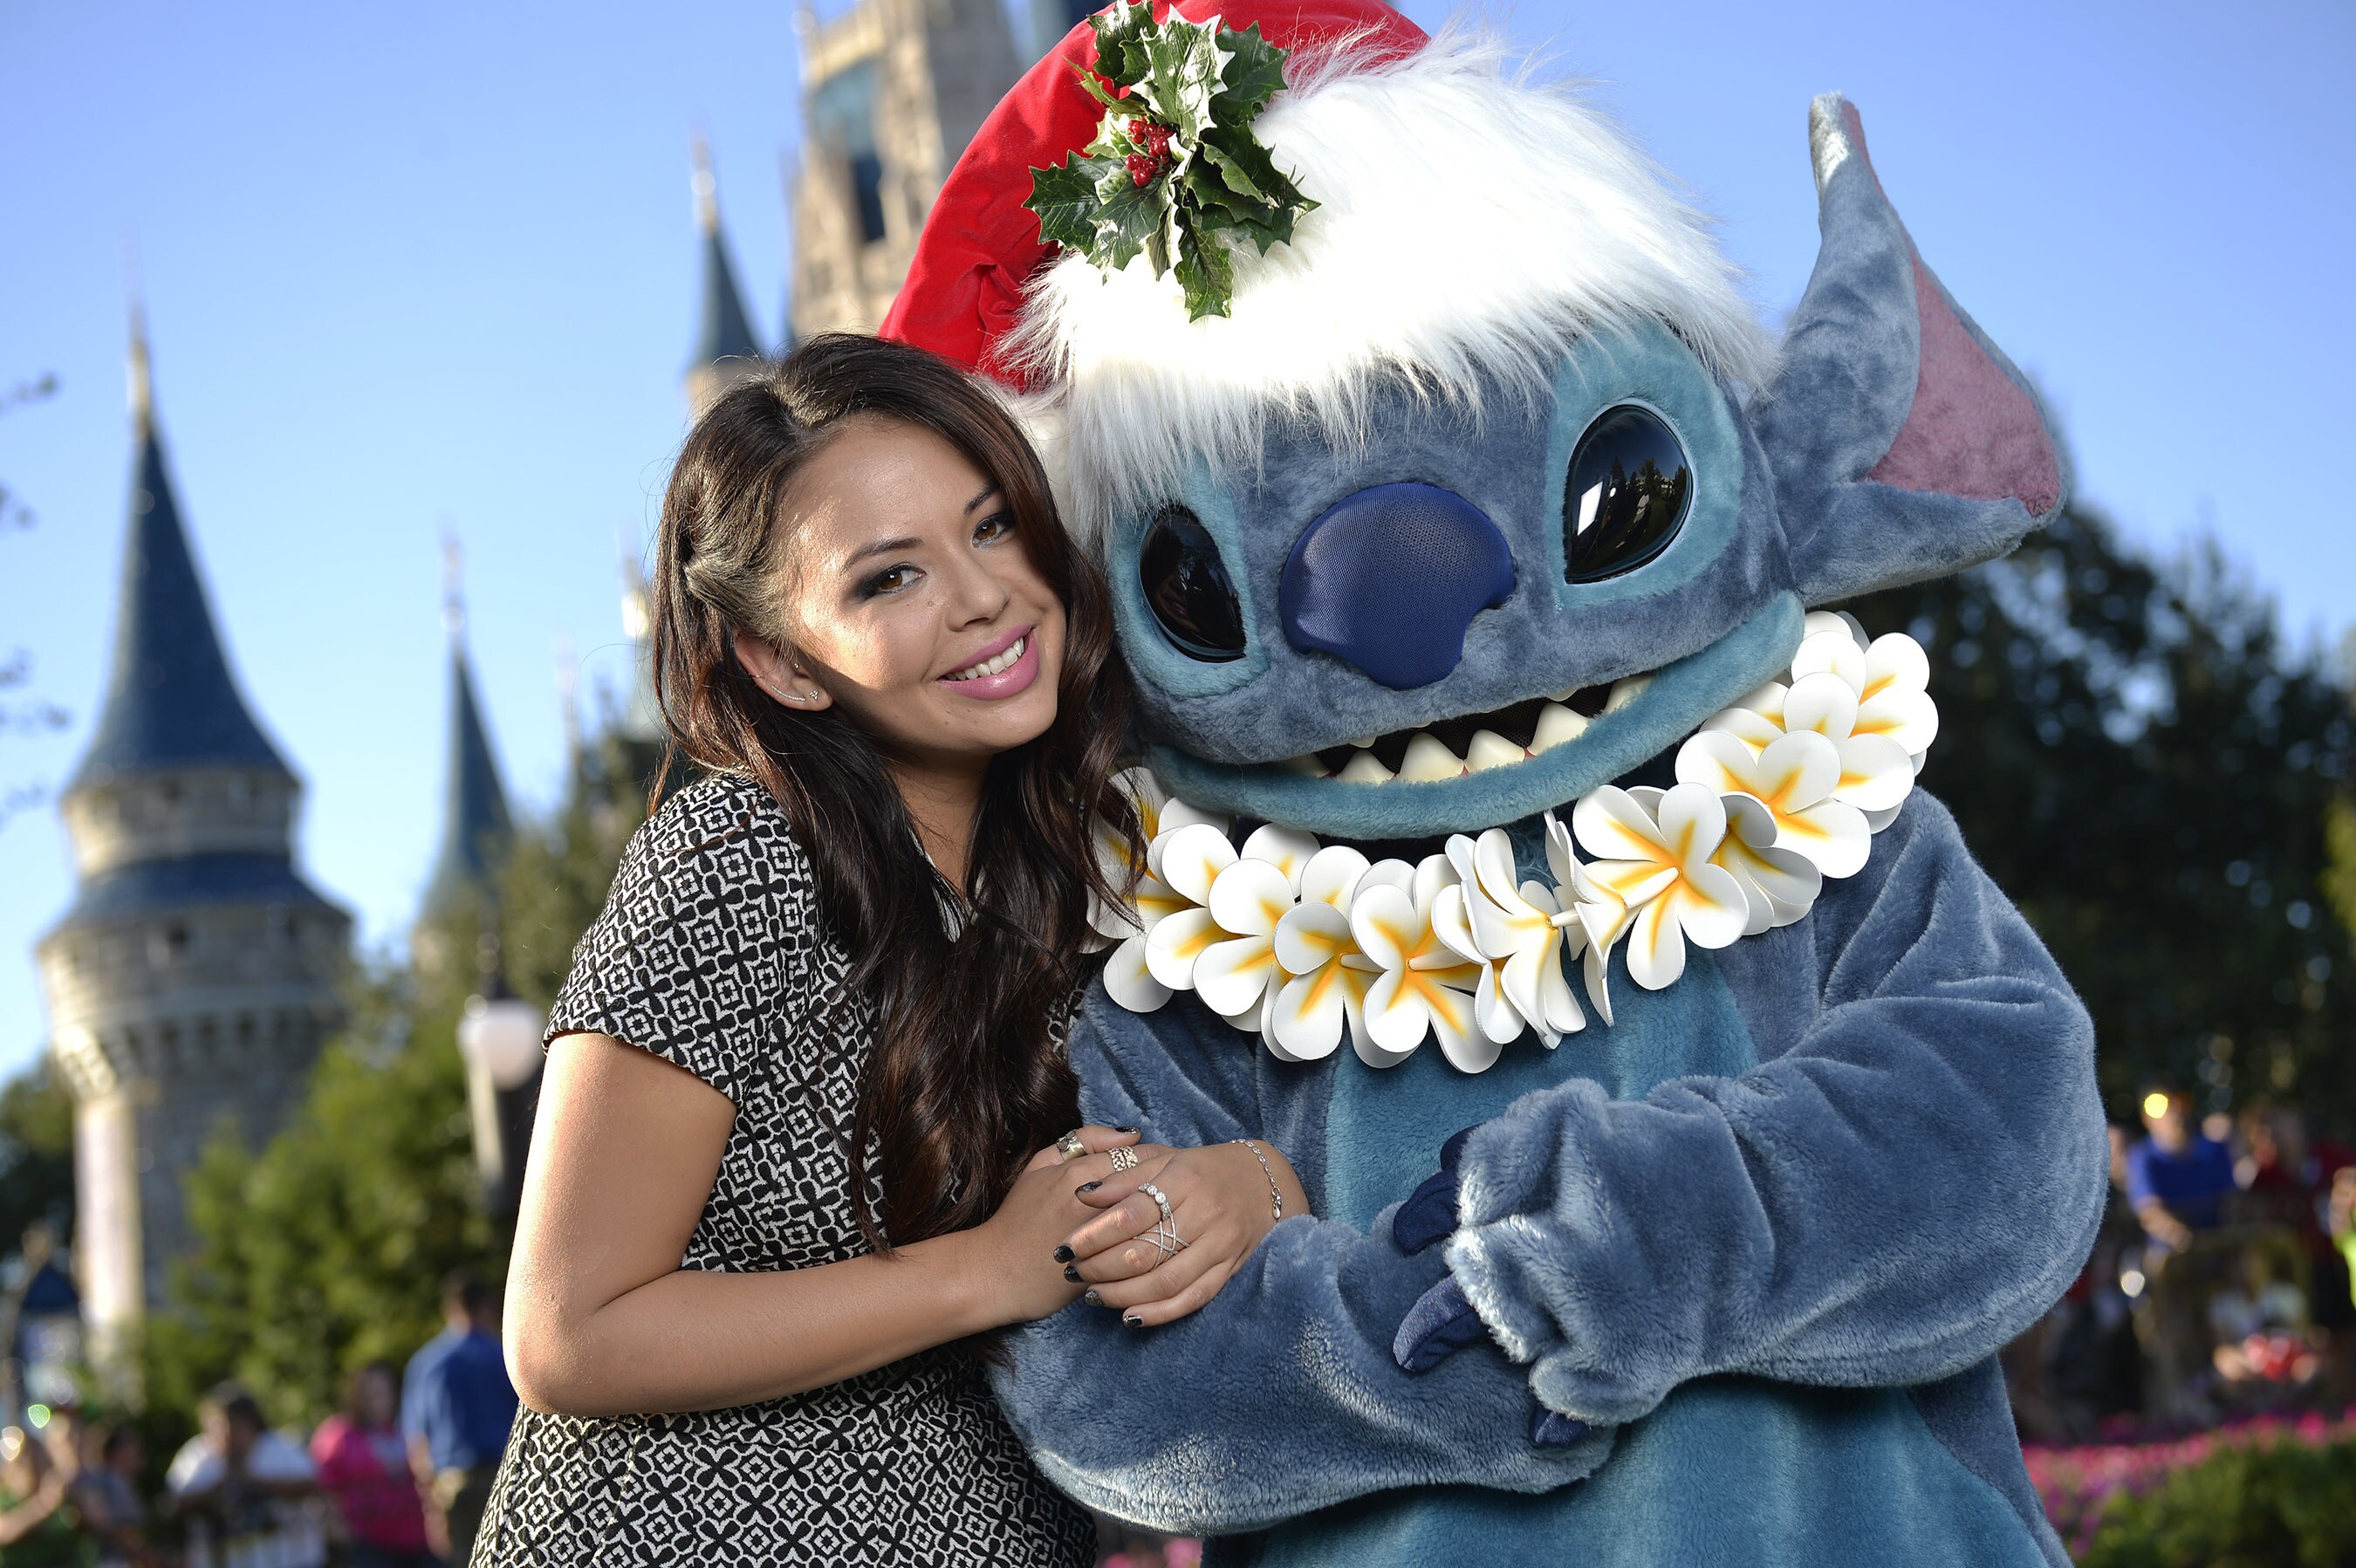 Actress Janel Parrish, one of the stars of "Pretty Little Liars" on ABC Family (soon to be Freefo...